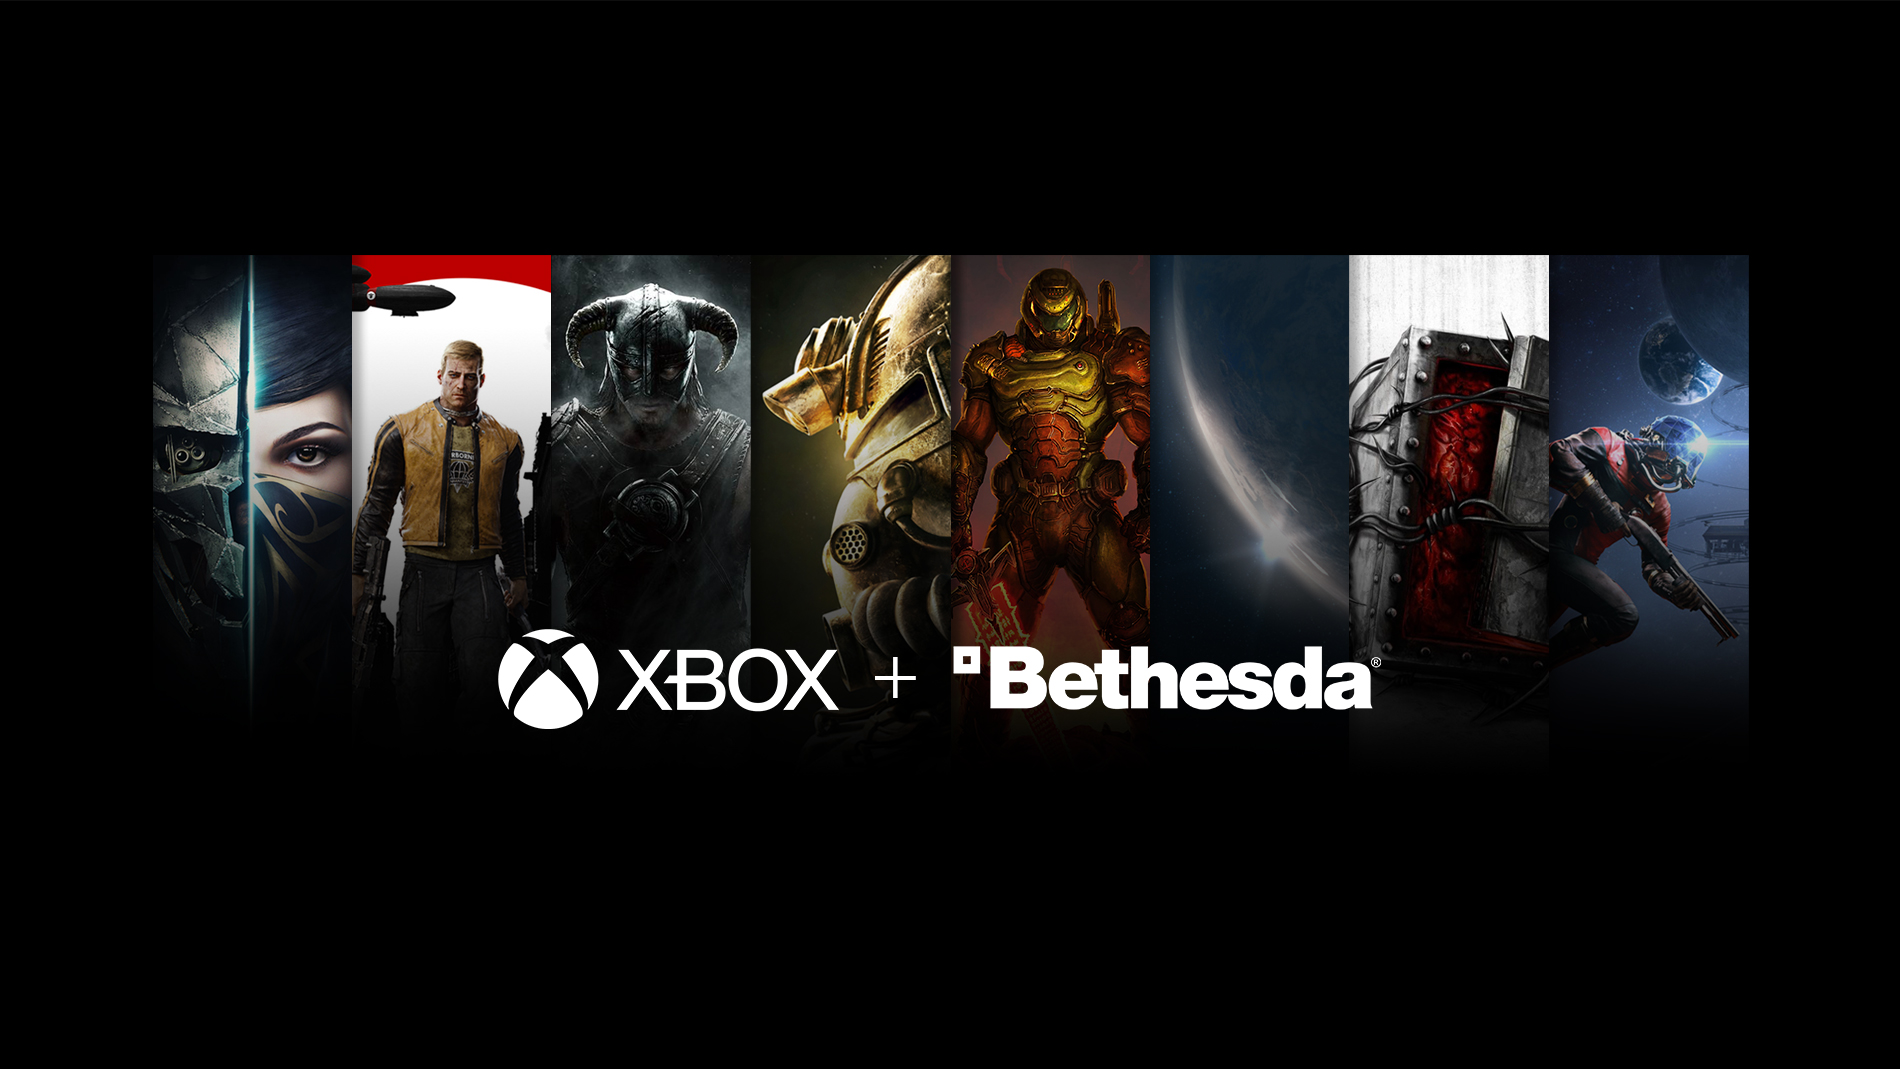 Bethesda Softworks says it still plans to support and update